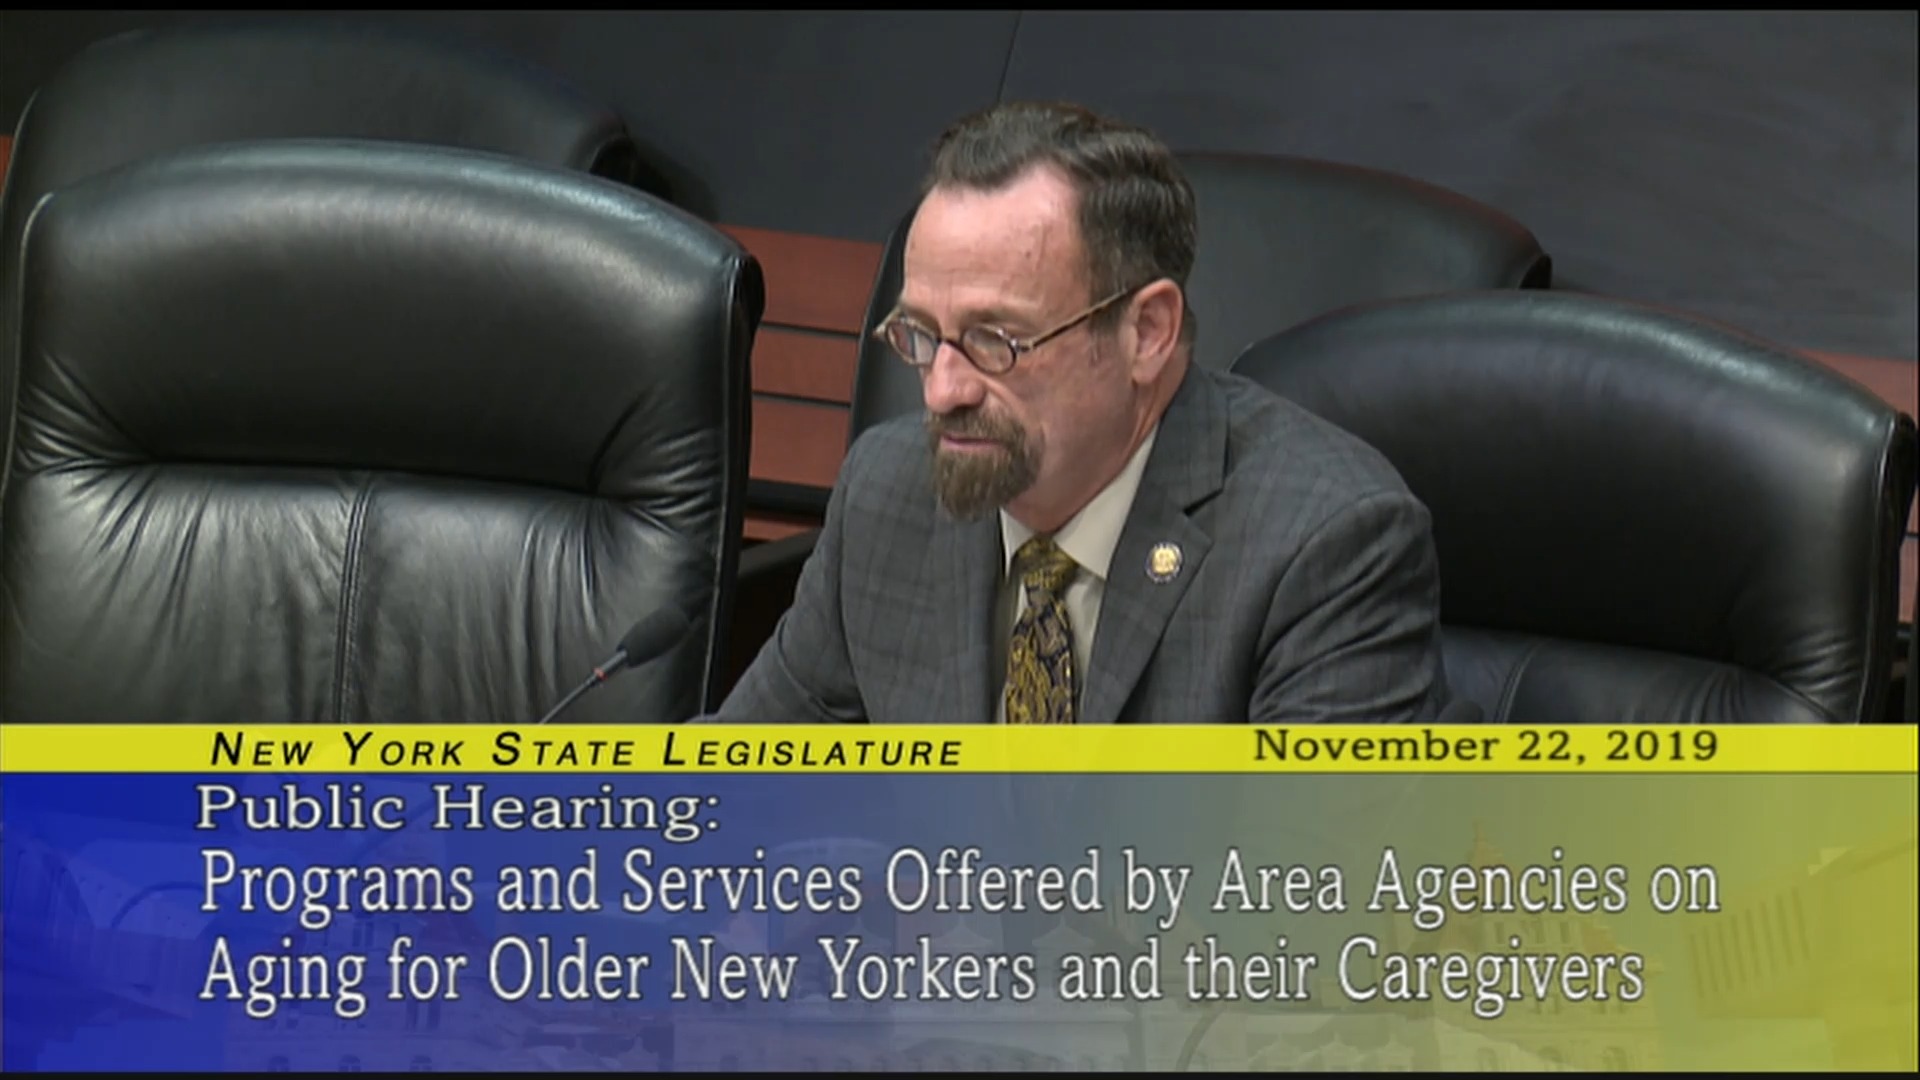 Public Hearing On Programs And Services For Aging New Yorkers (7)